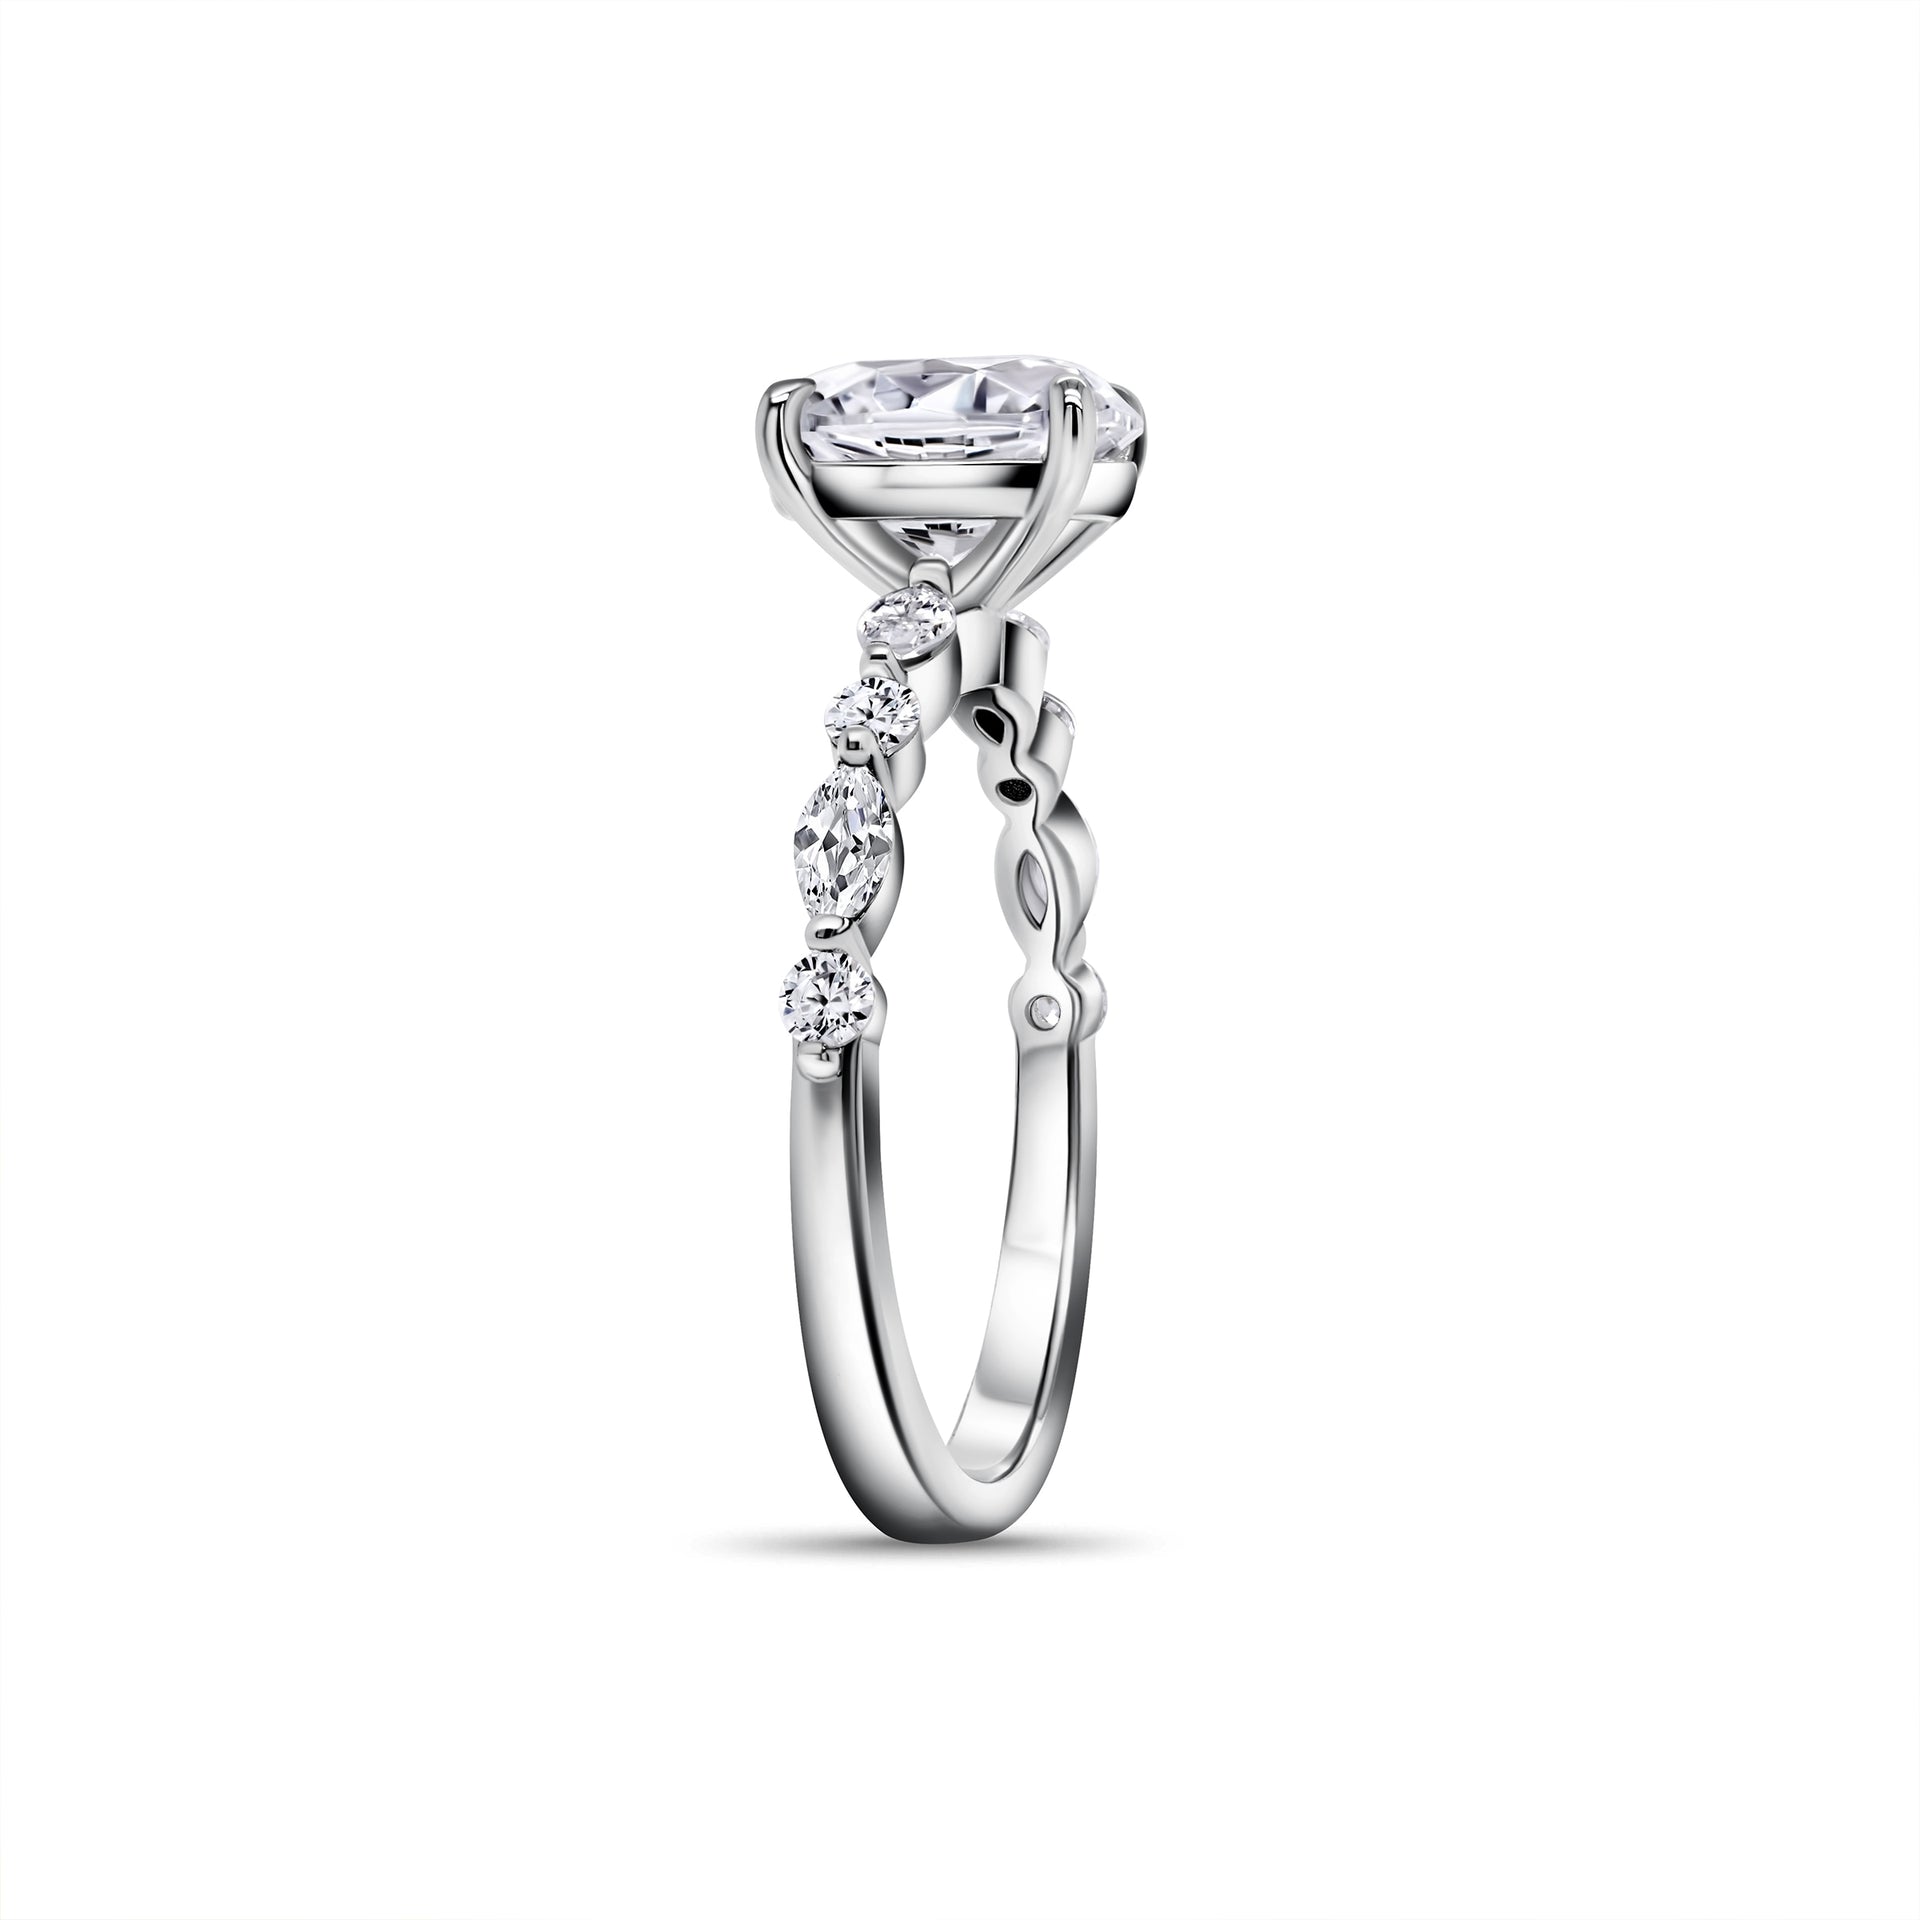 stunning partial open side view of silver oval engagement ring with uniquely designed half eternity band shown in silver